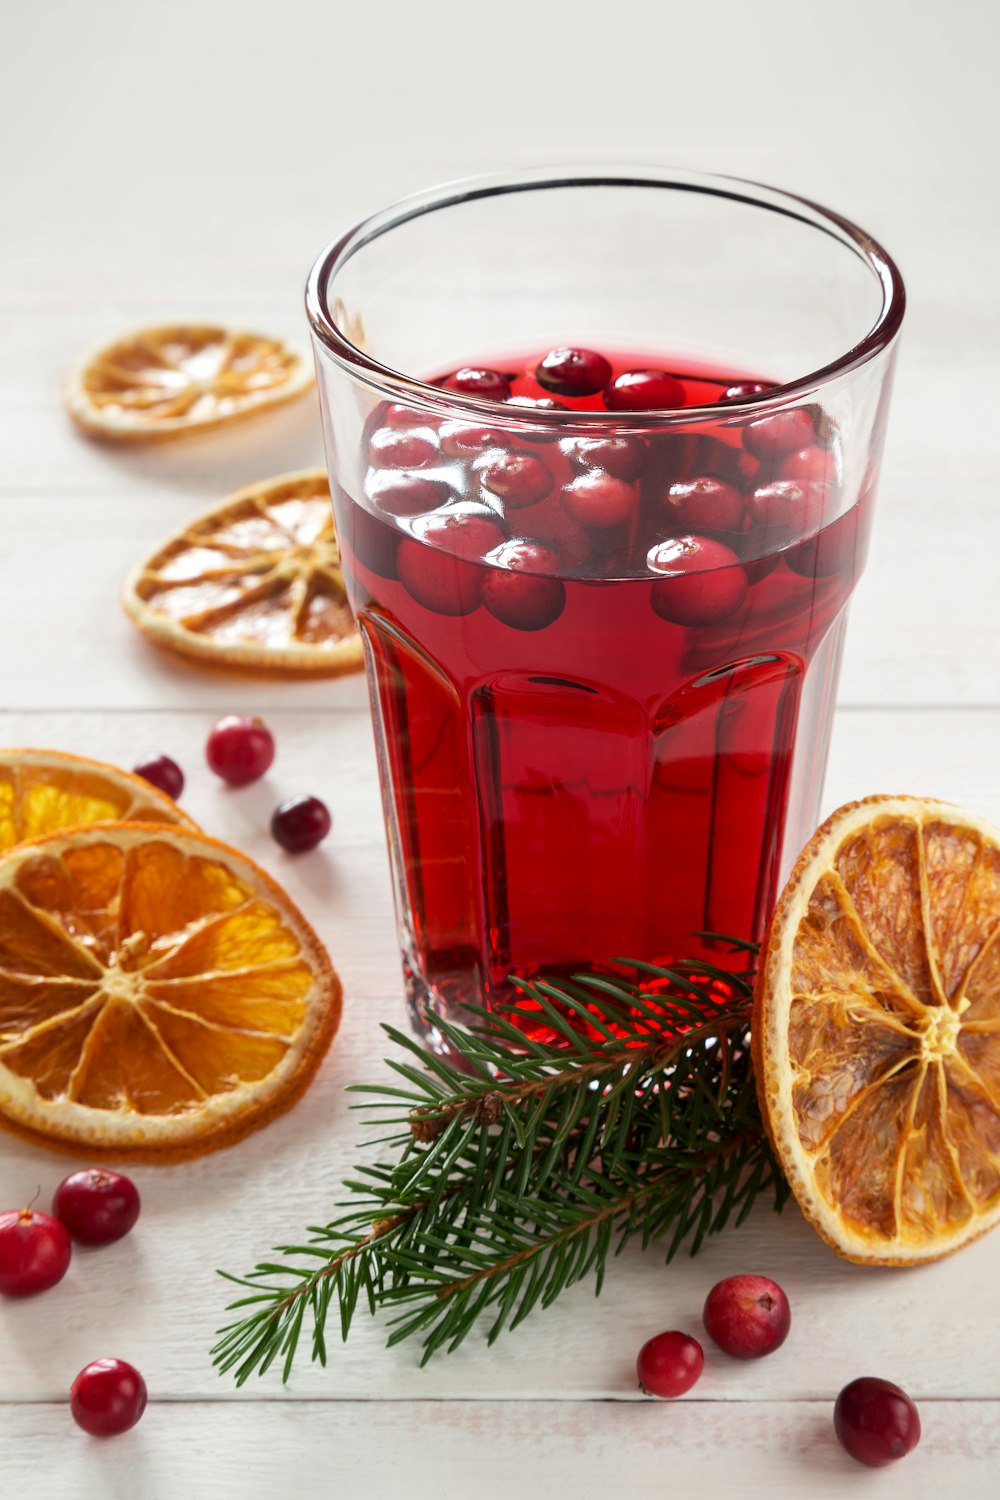 a glass of red liquid with oranges and oranges